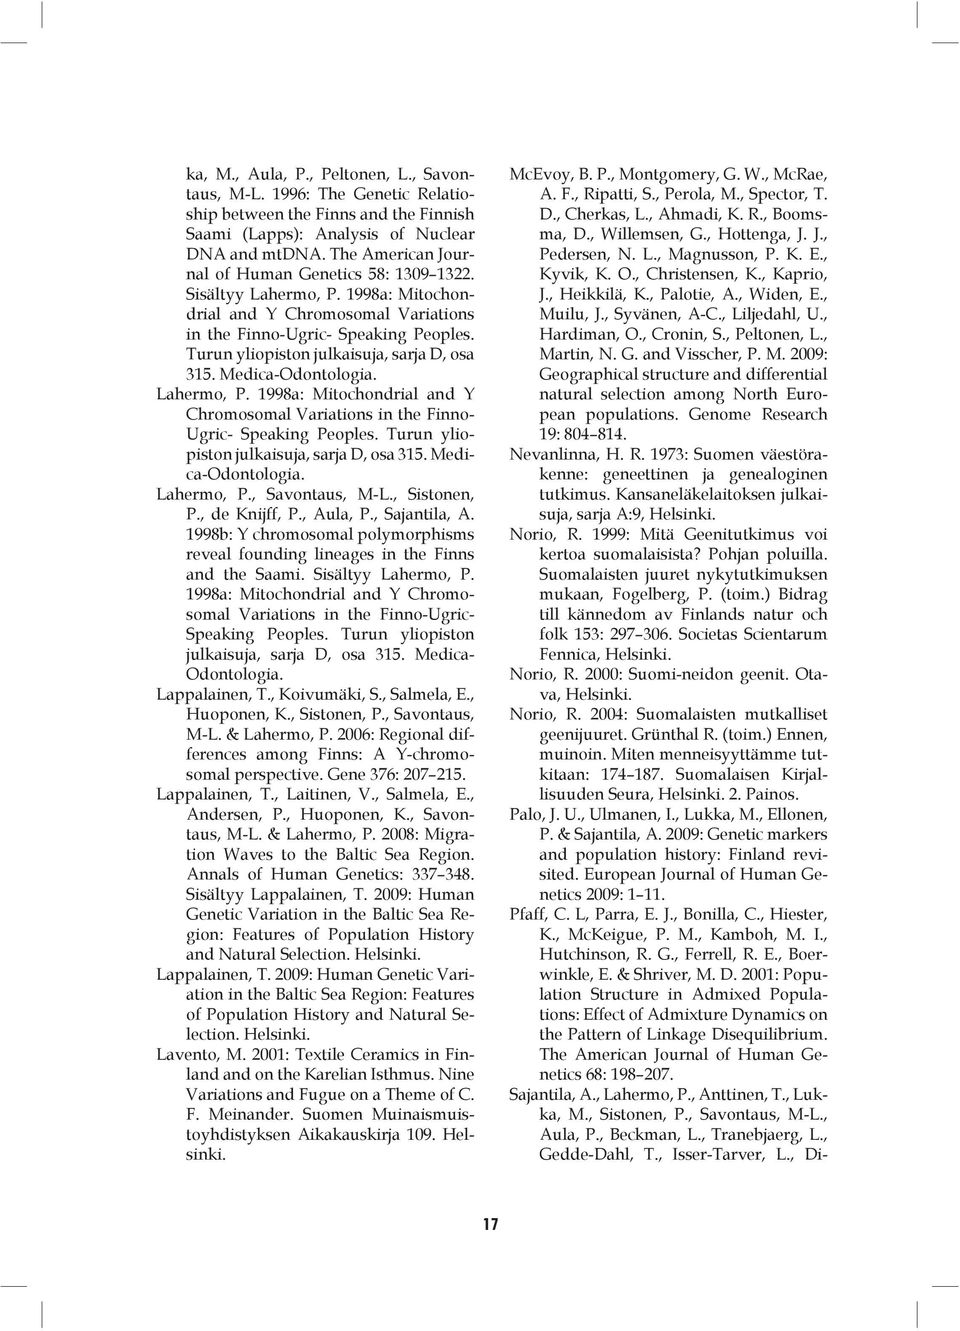 Turun yliopiston julkaisuja, sarja D, osa 315. Medica-Odontologia. Lahermo, P. 1998a: Mitochondrial and Y Chromosomal Variations in the Finno- Ugric- Speaking Peoples.